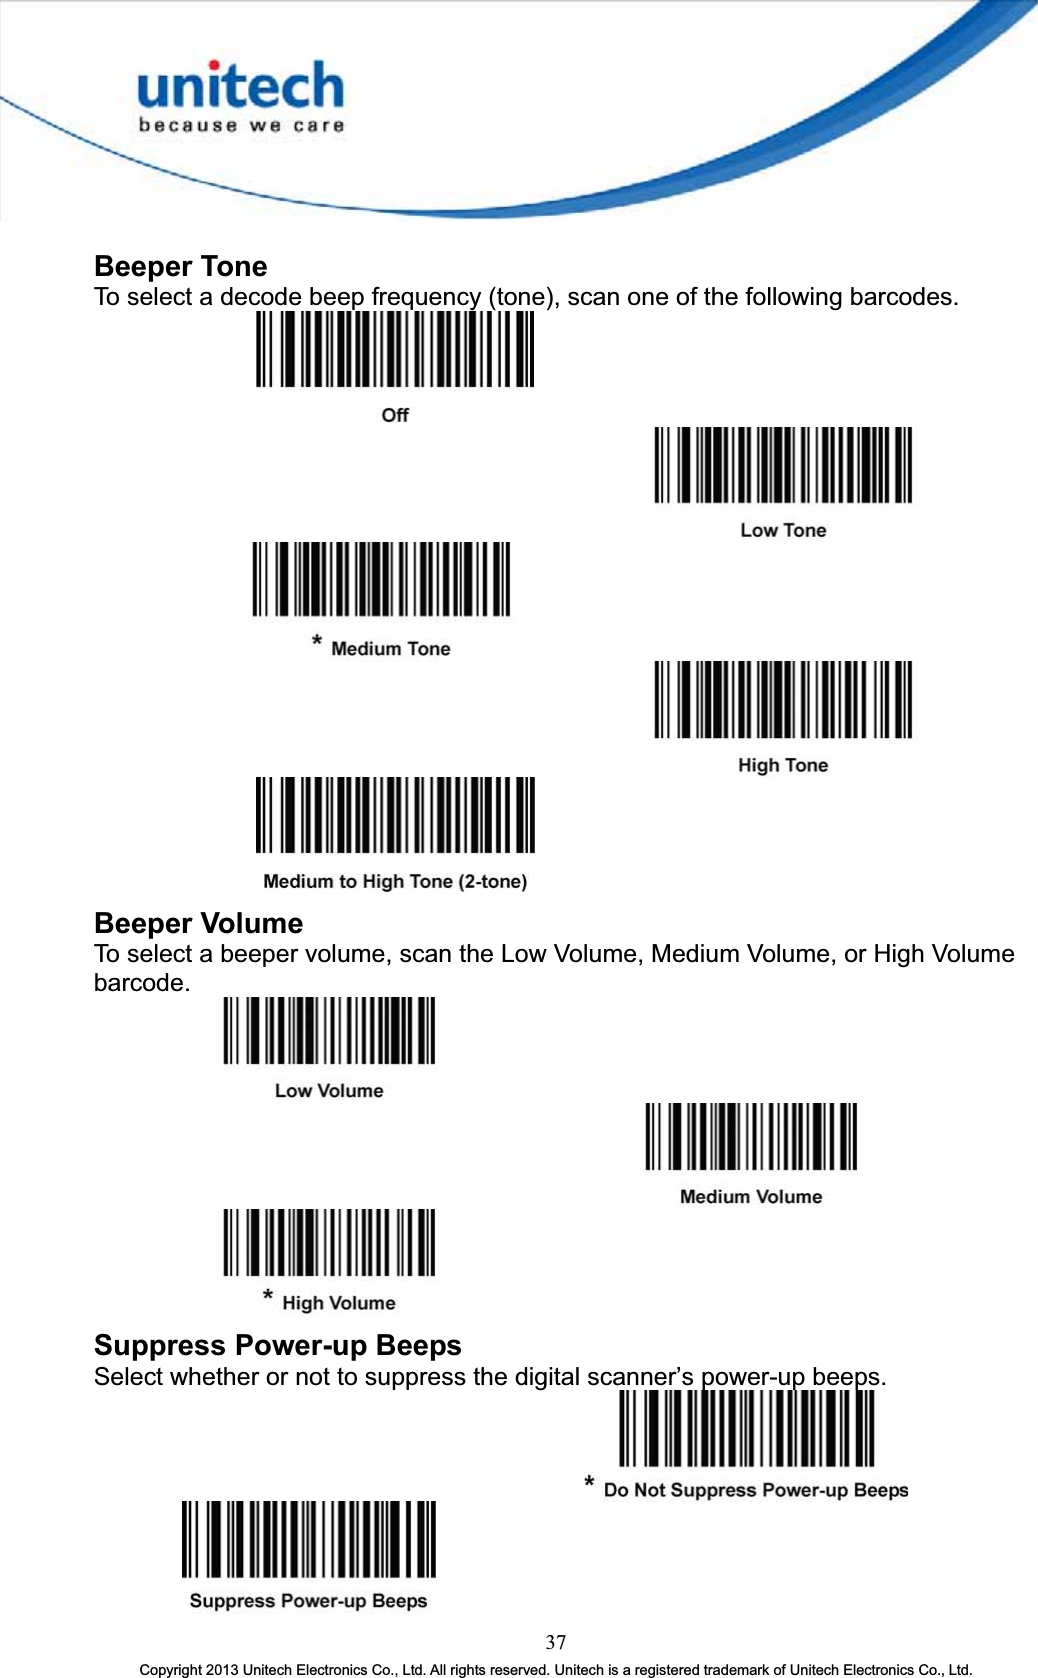 Beeper Tone To select a decode beep frequency (tone), scan one of the following barcodes. Beeper Volume To select a beeper volume, scan the Low Volume, Medium Volume, or High Volume barcode.Suppress Power-up Beeps Select whether or not to suppress the digital scanner’s power-up beeps. 37Copyright 2013 Unitech Electronics Co., Ltd. All rights reserved. Unitech is a registered trademark of Unitech Electronics Co., Ltd. 